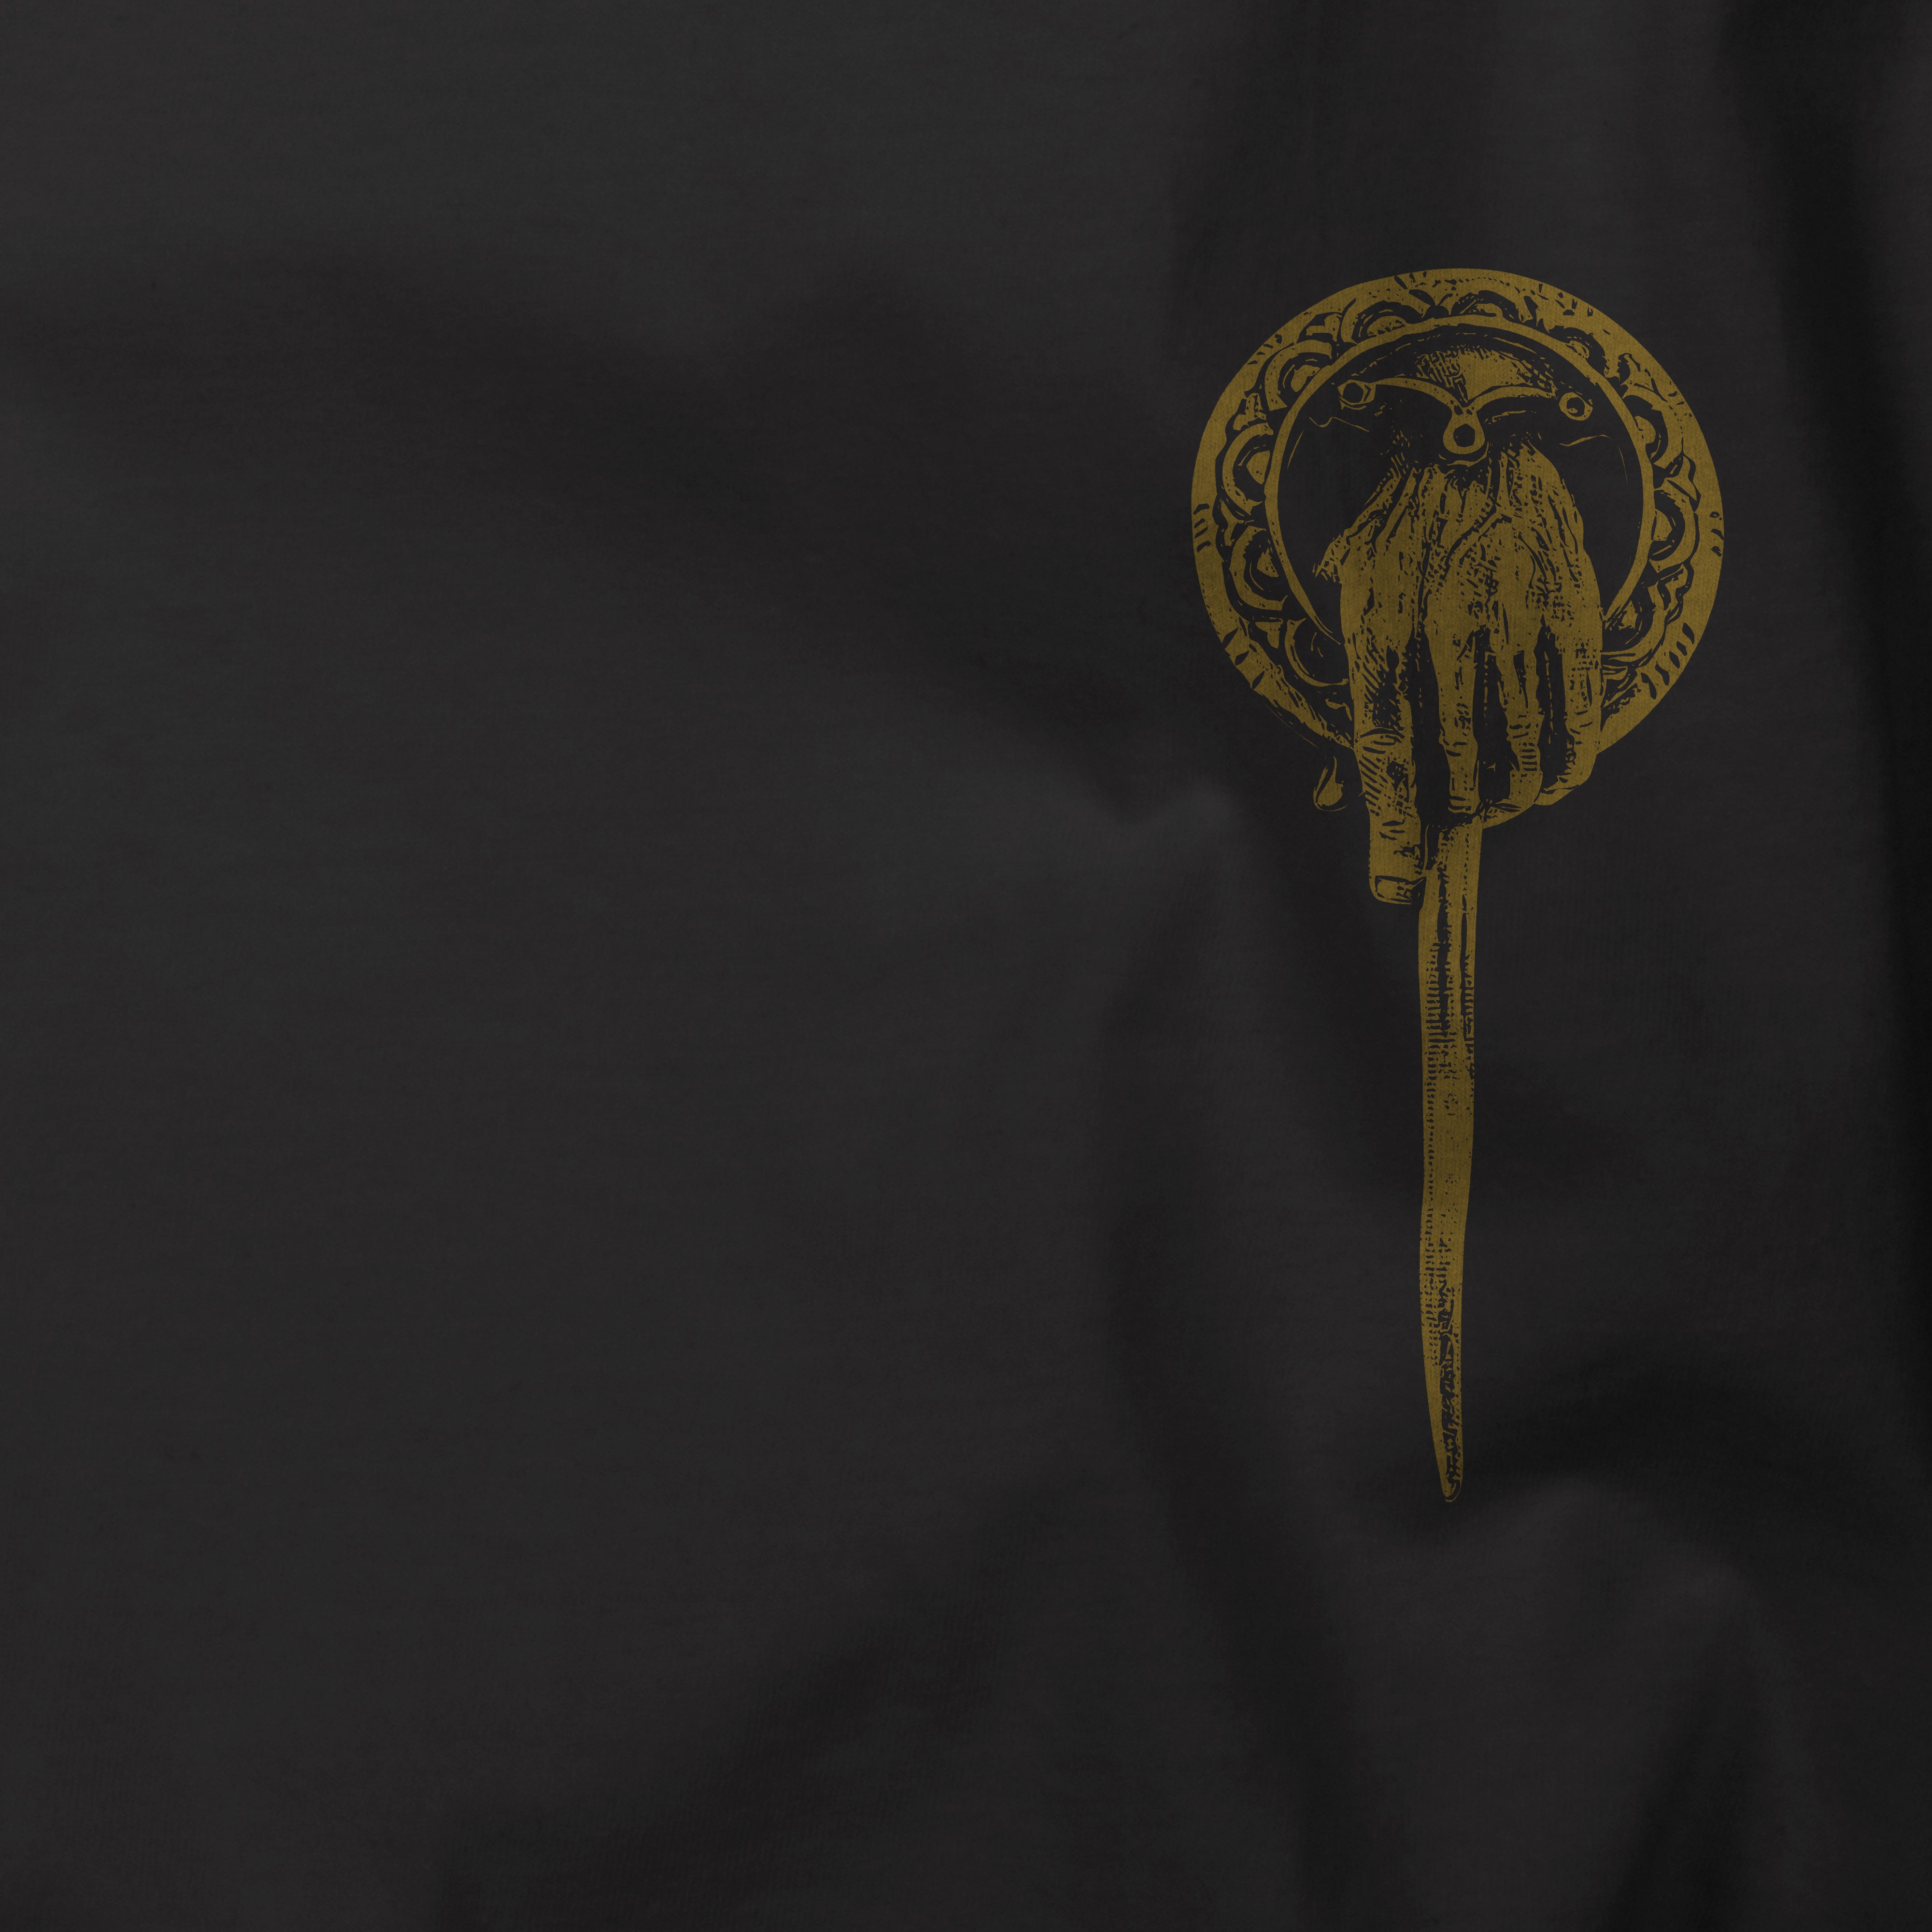 The HAND of the KING Long Sleeve T-SHIRT